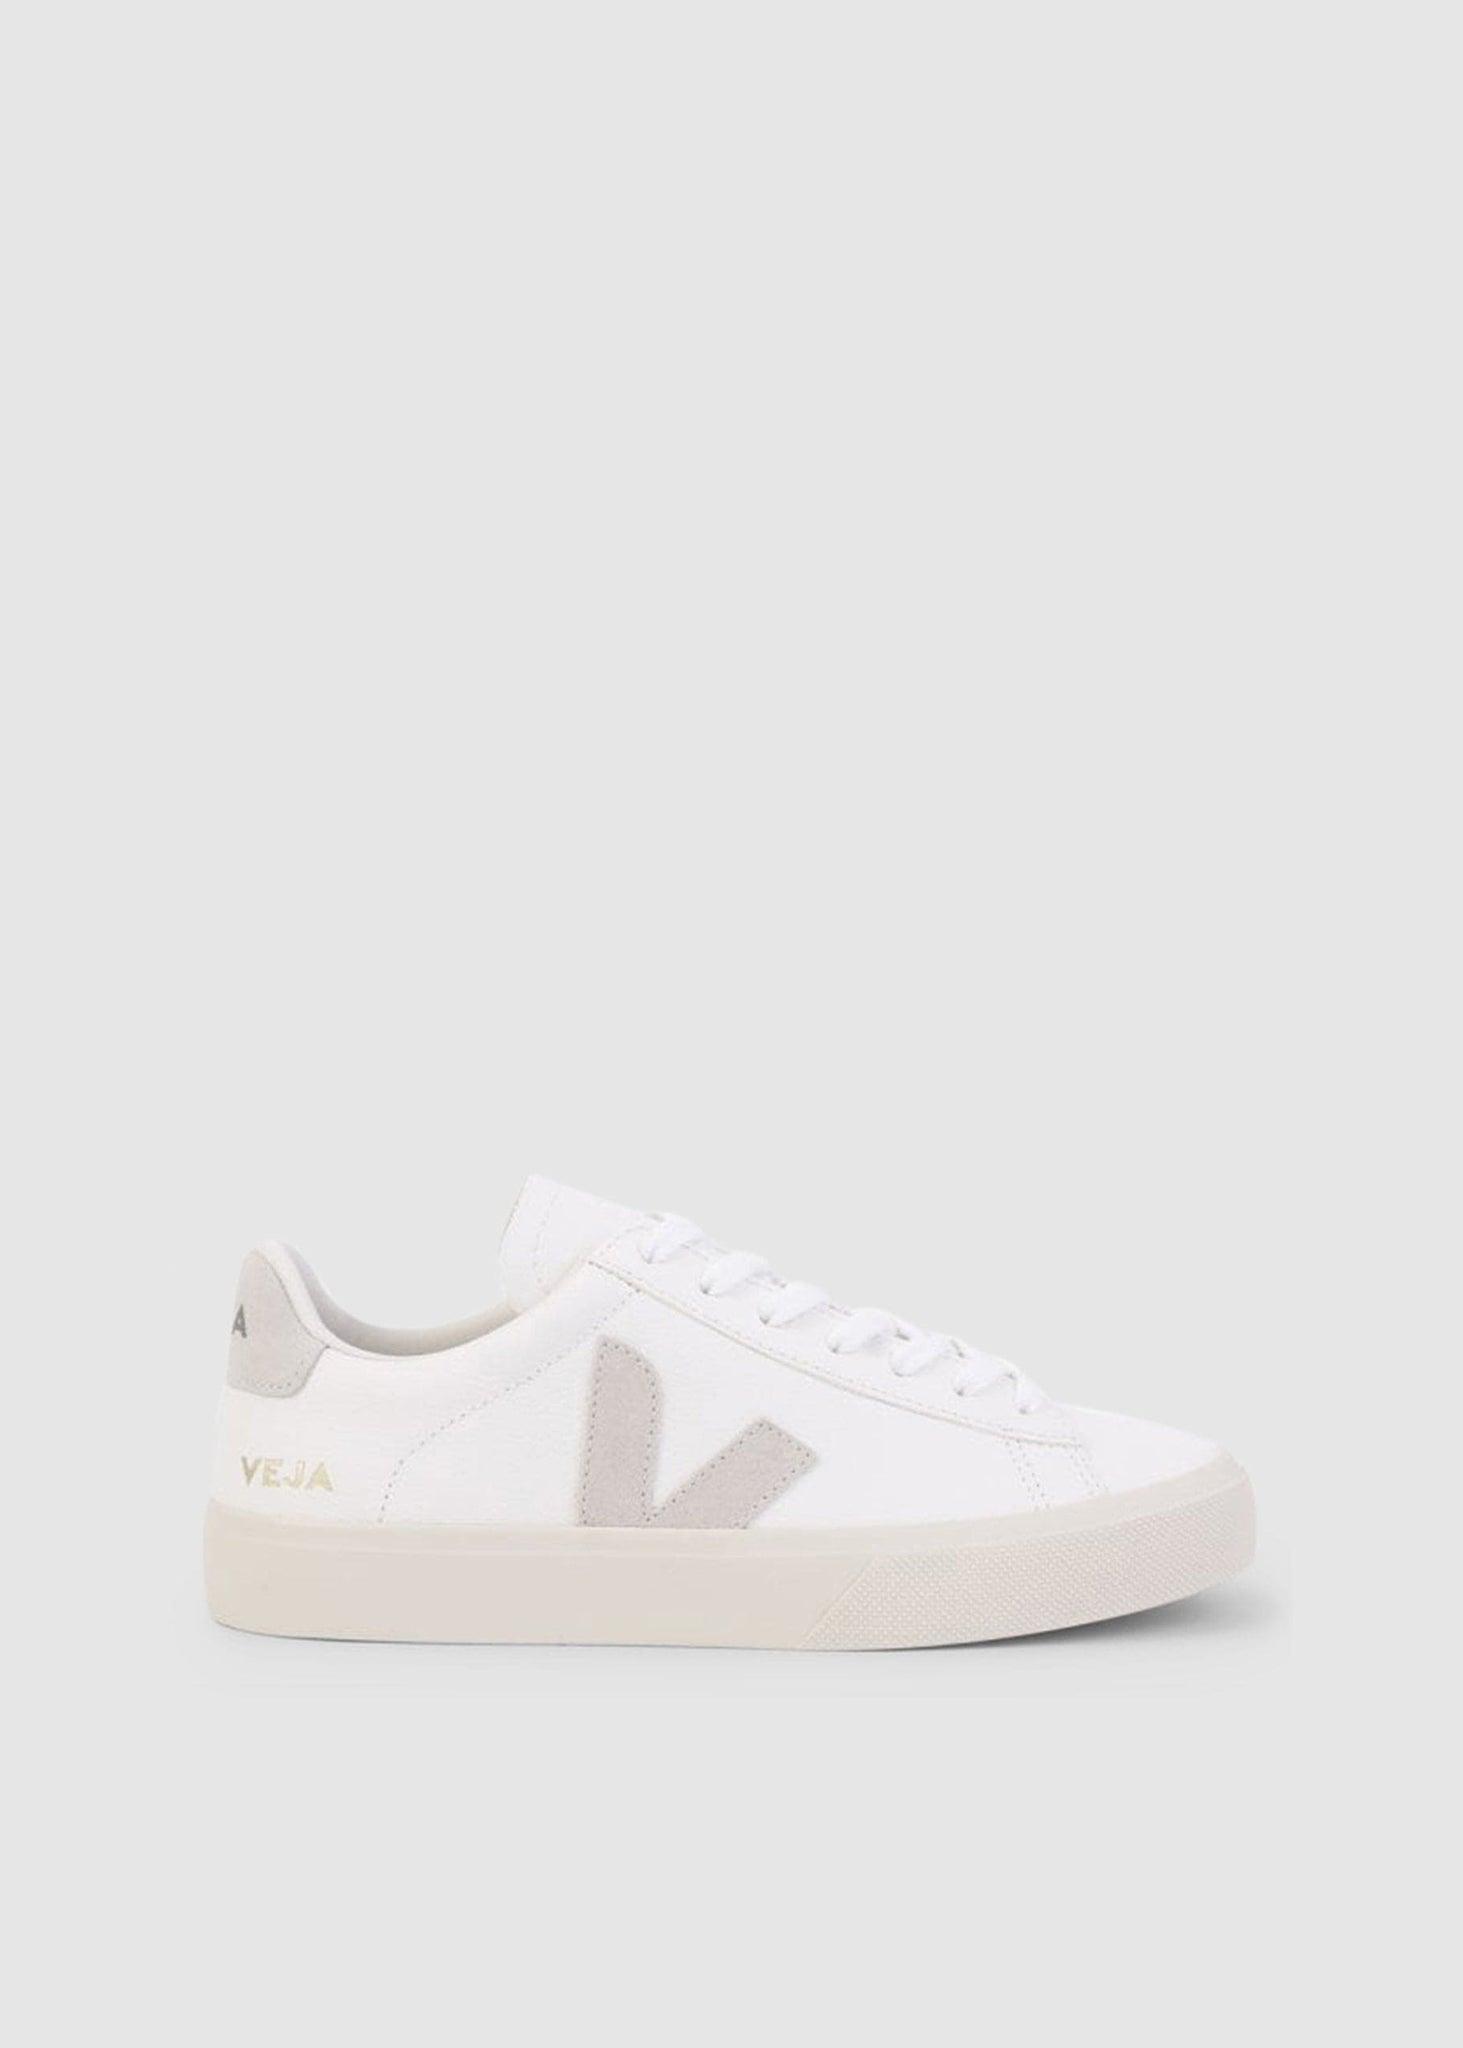 Veja Campo Leather Trainers in White | Lyst UK